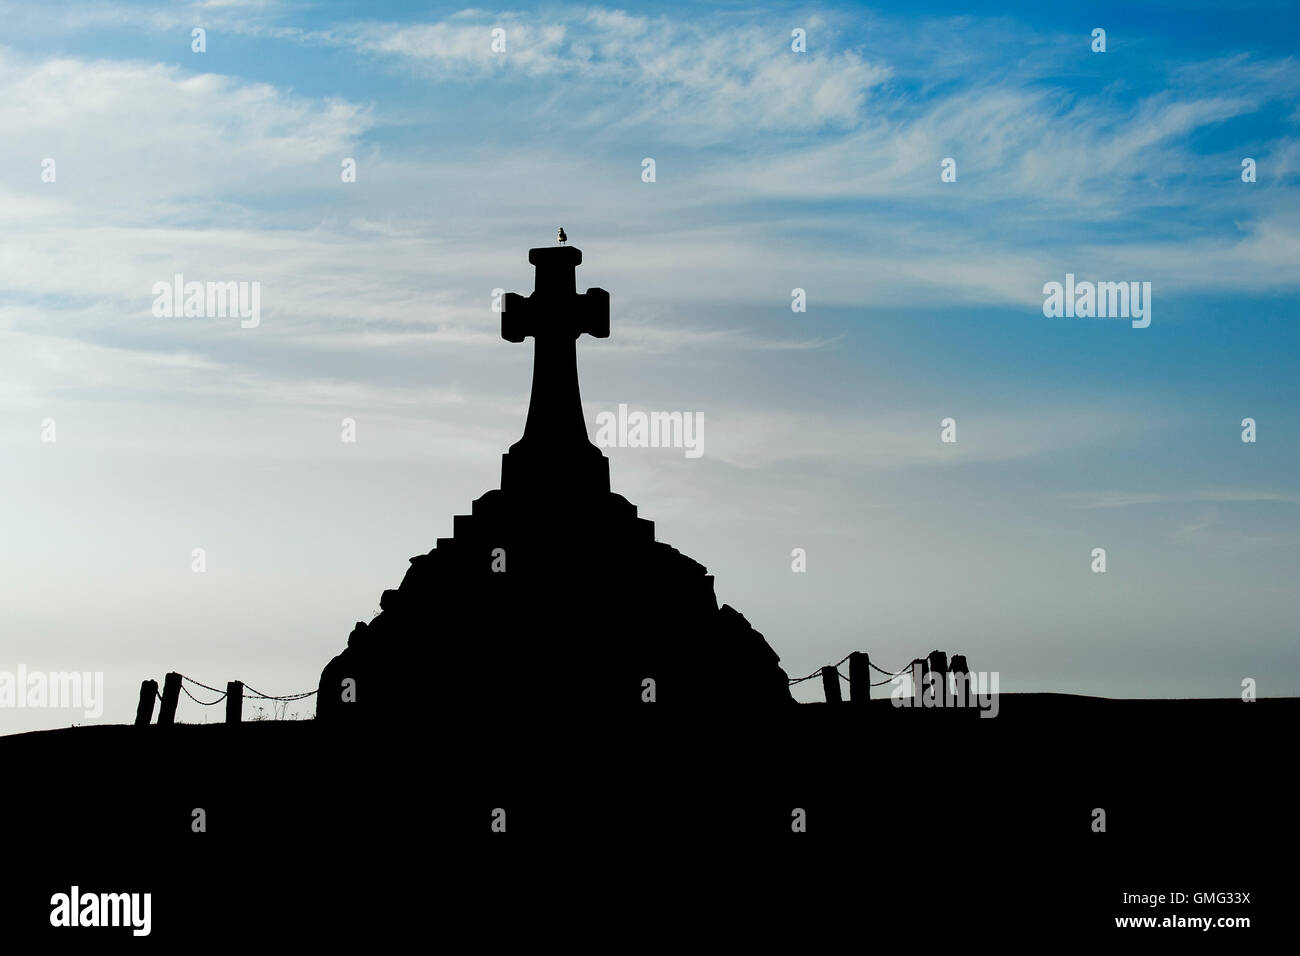 The Newquay War Memorial seen in silhouette. Stock Photo